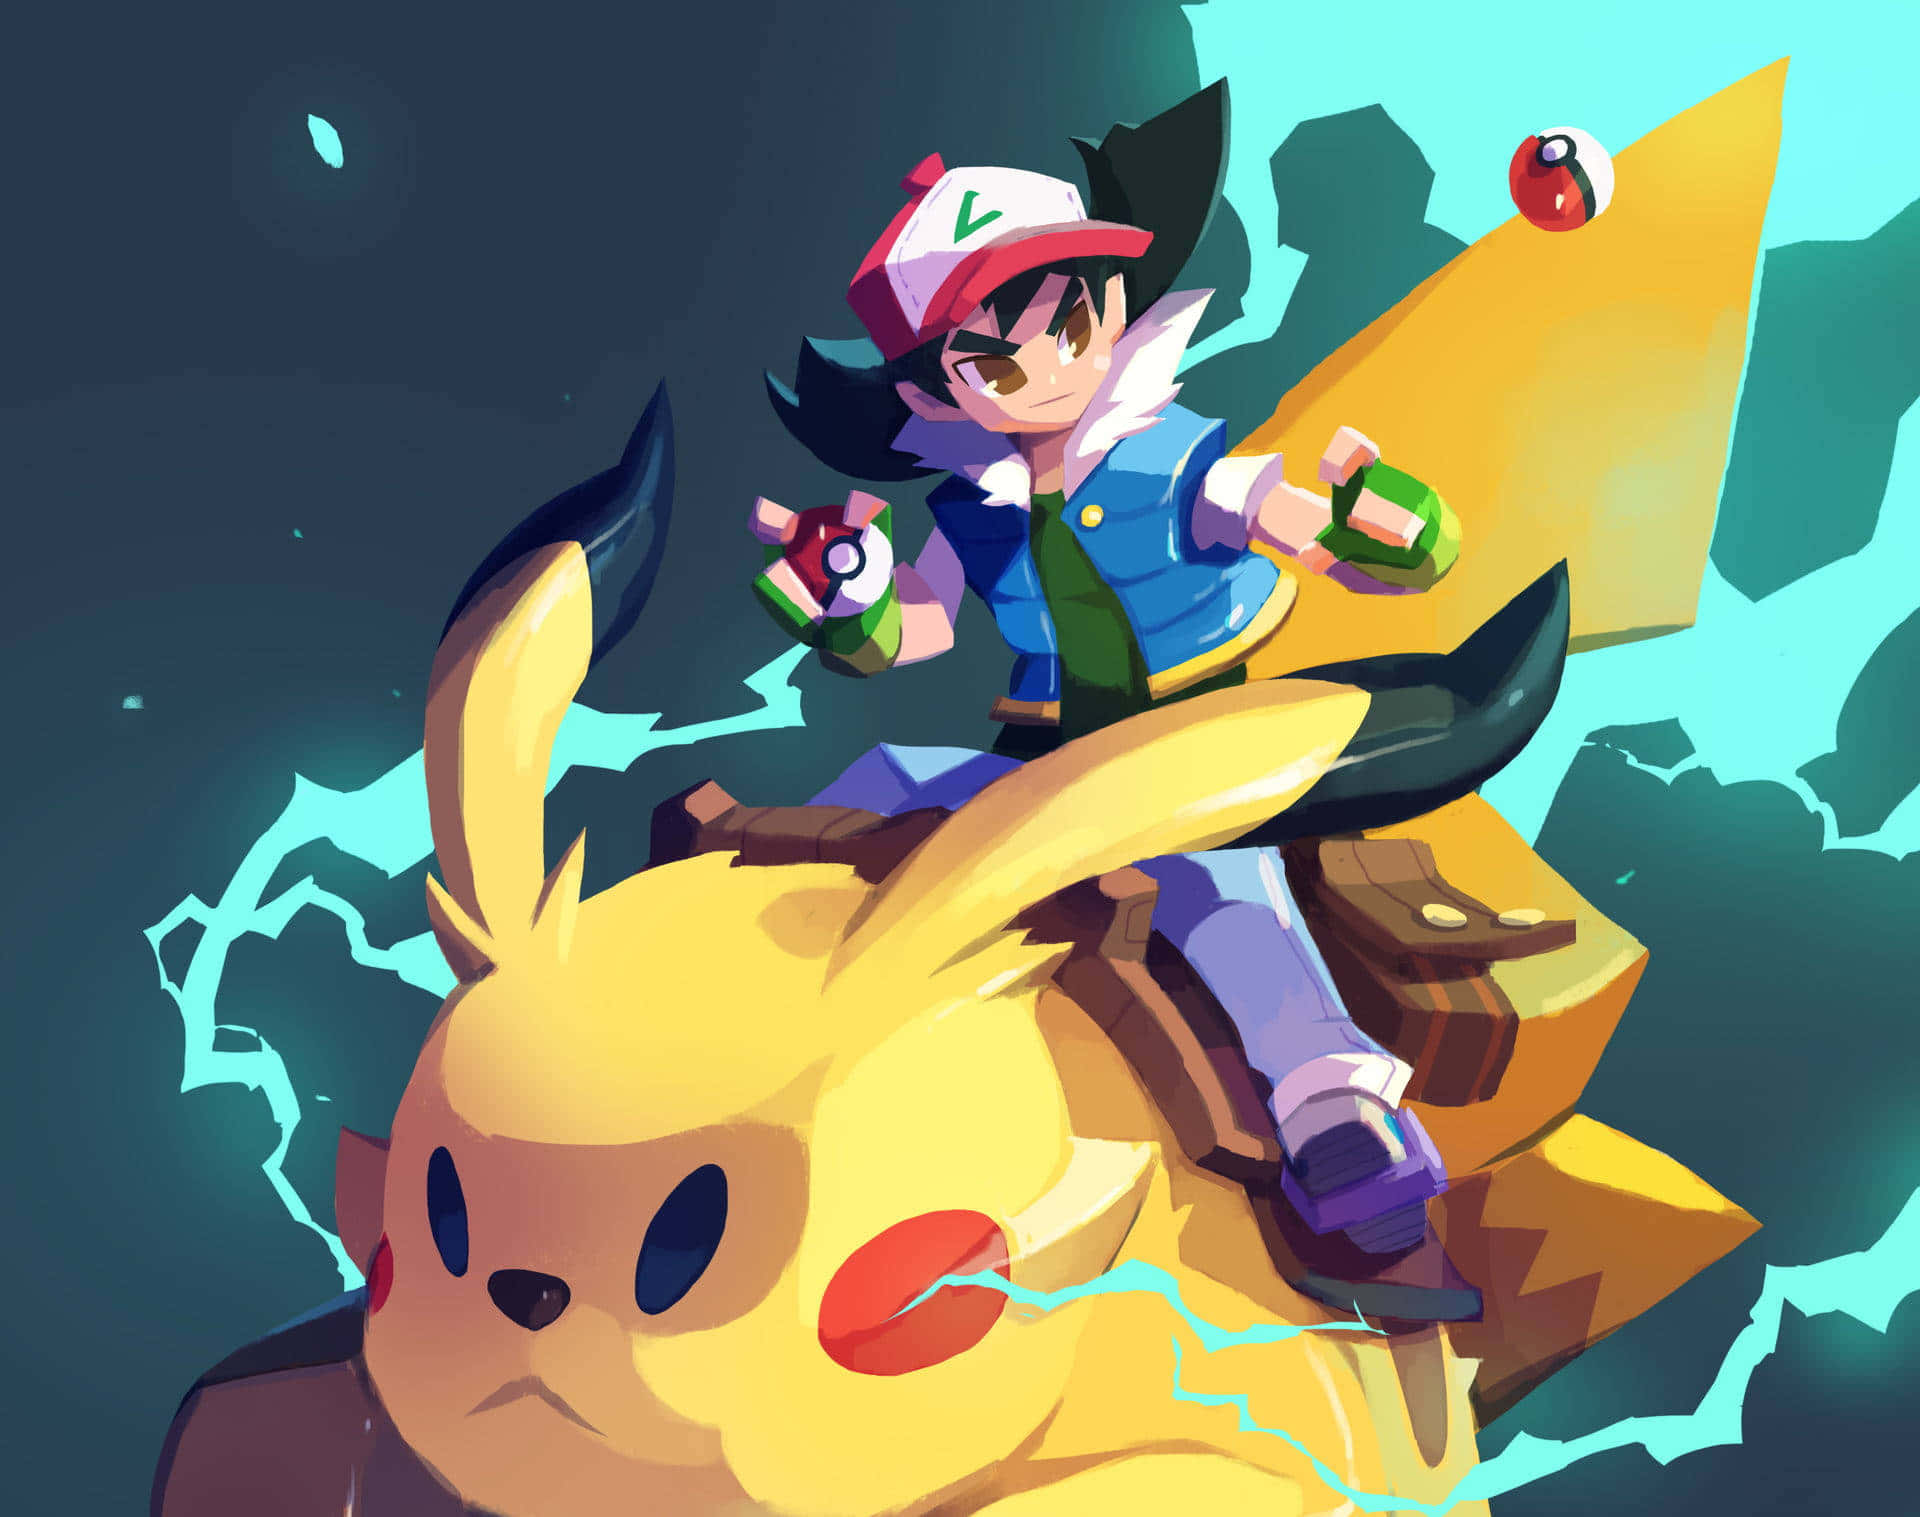 Ash and Pikachu Together in Adventure Wallpaper